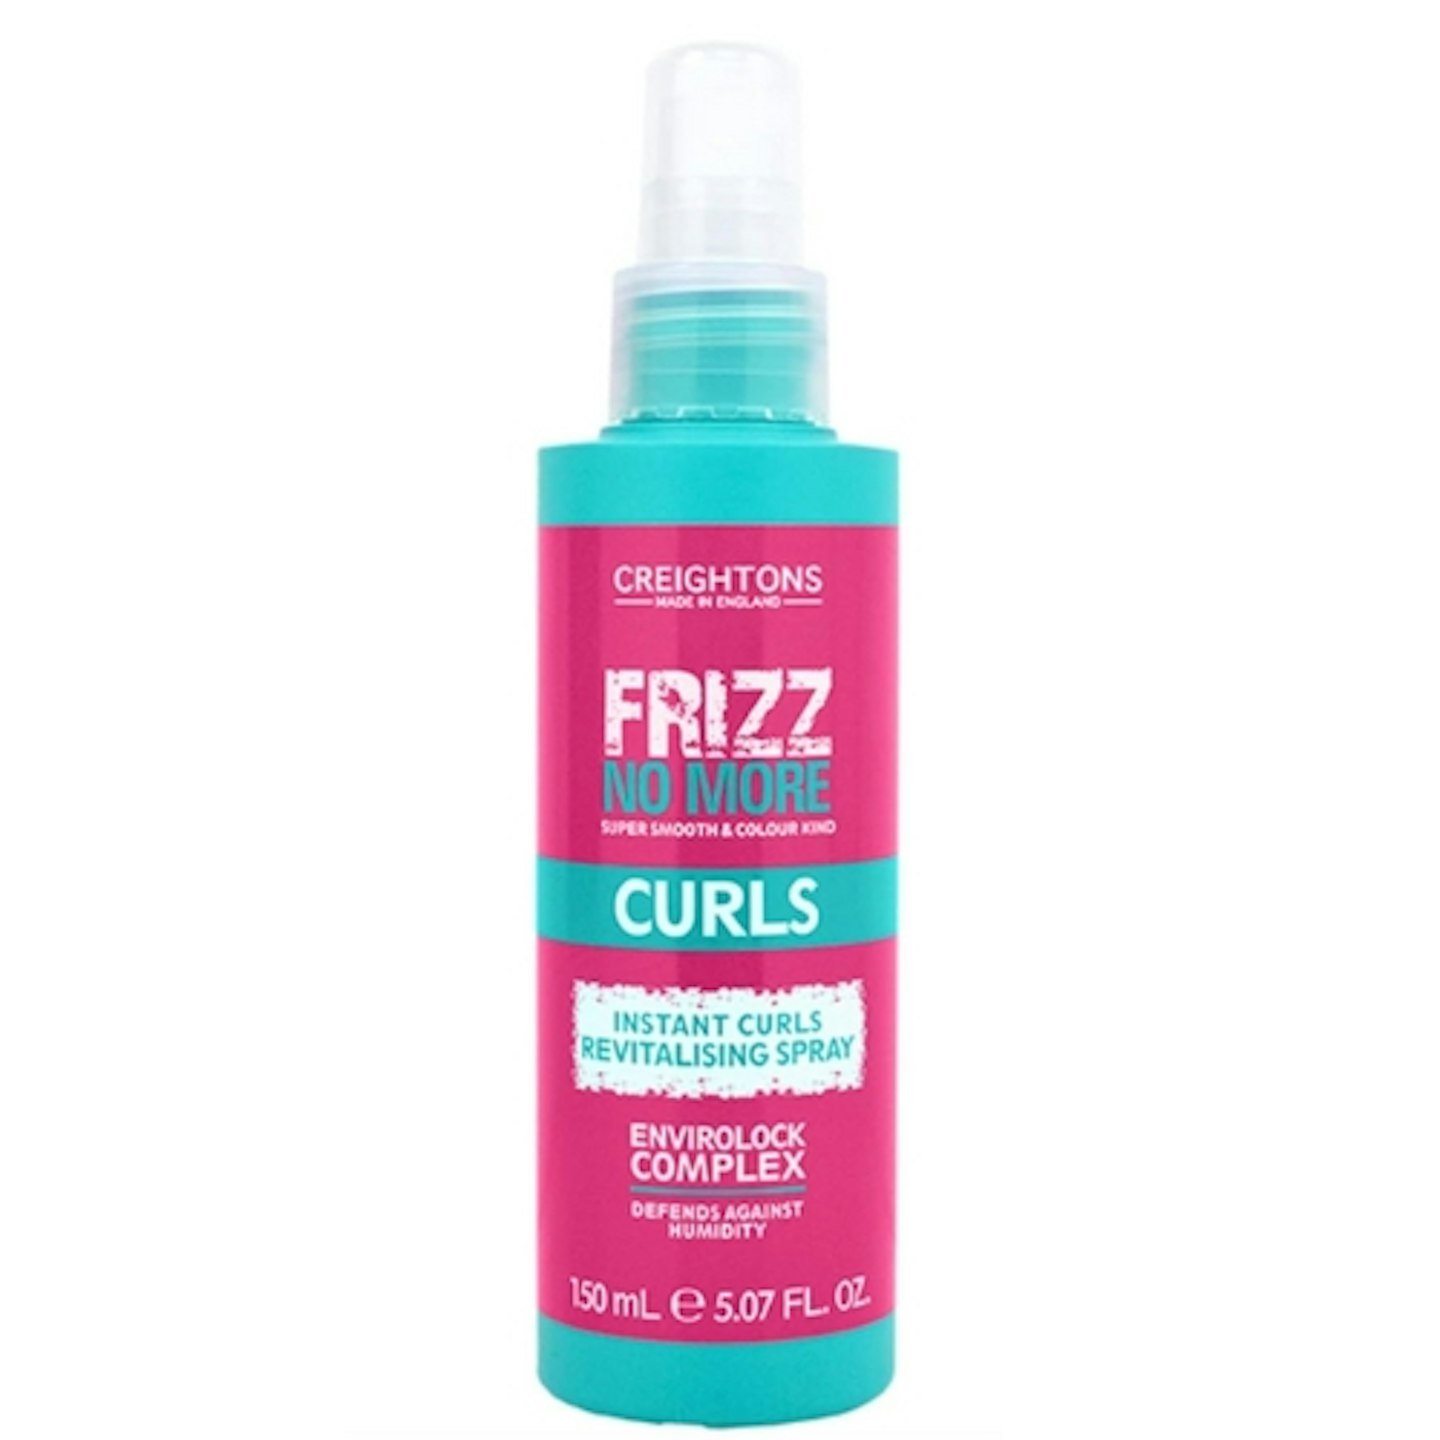 Creightons Frizz No More Instant Curls Revitalising Spray (150ml)